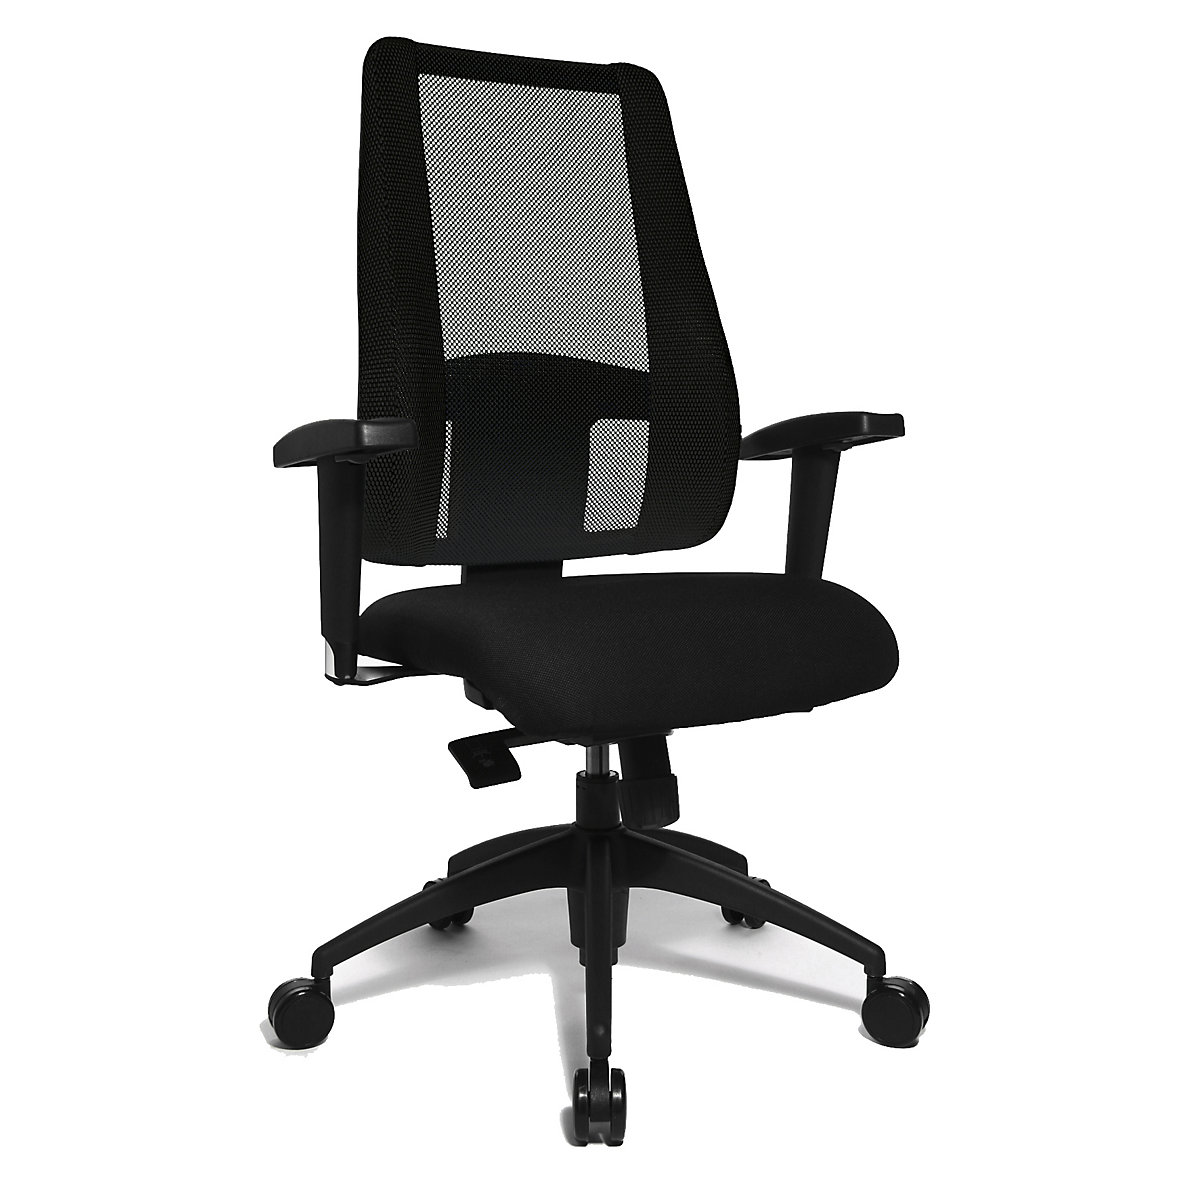 LADY SITNESS DELUXE office swivel chair – Topstar, flexible with 7 zones, black / black-5